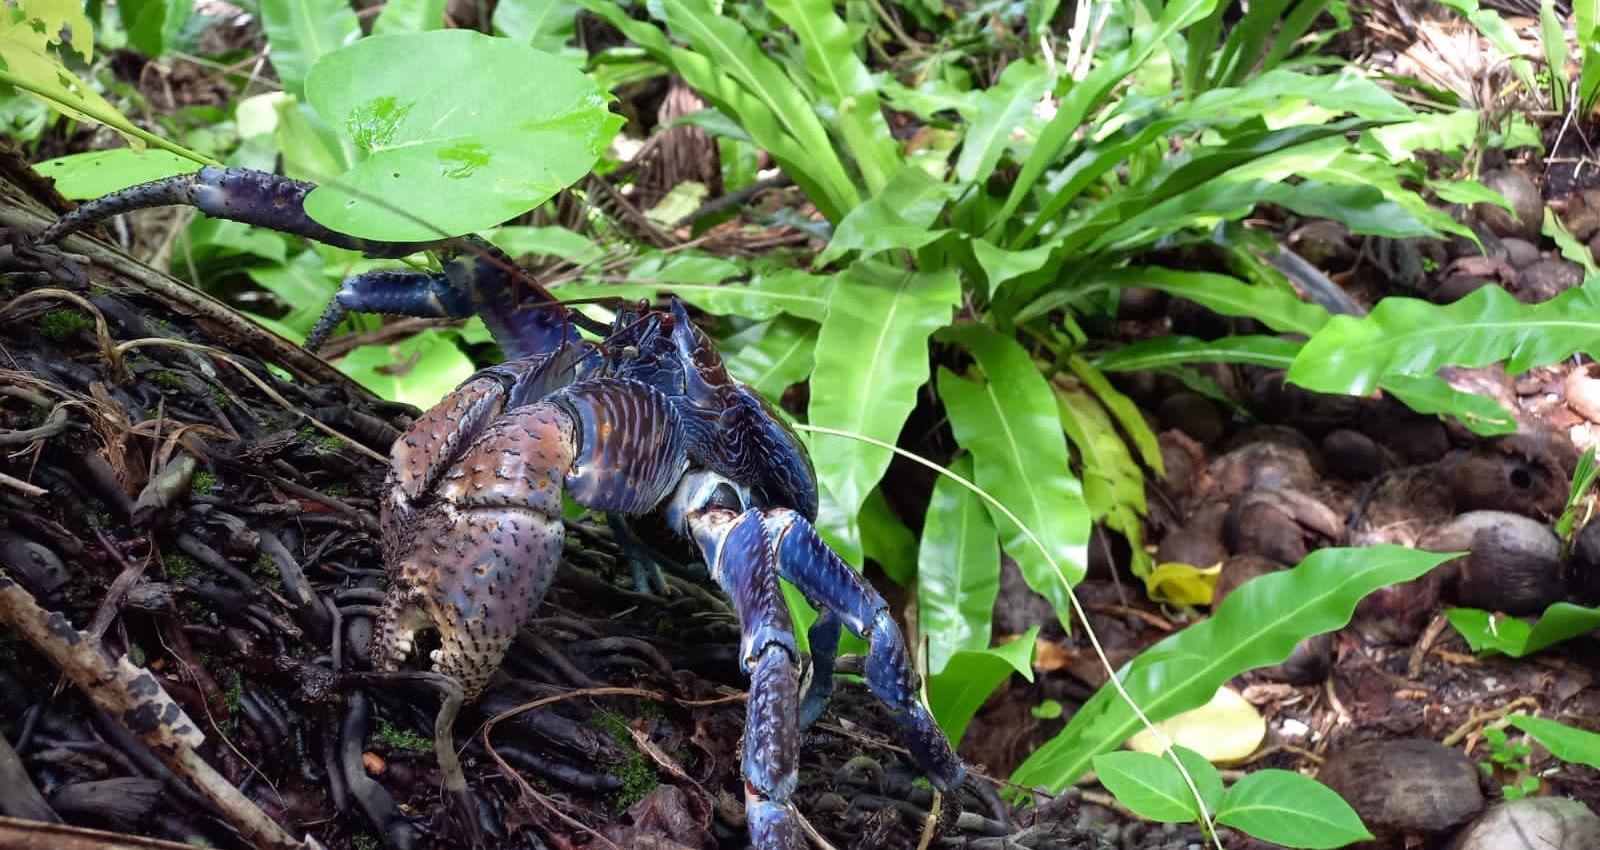 coconut crab in the forest